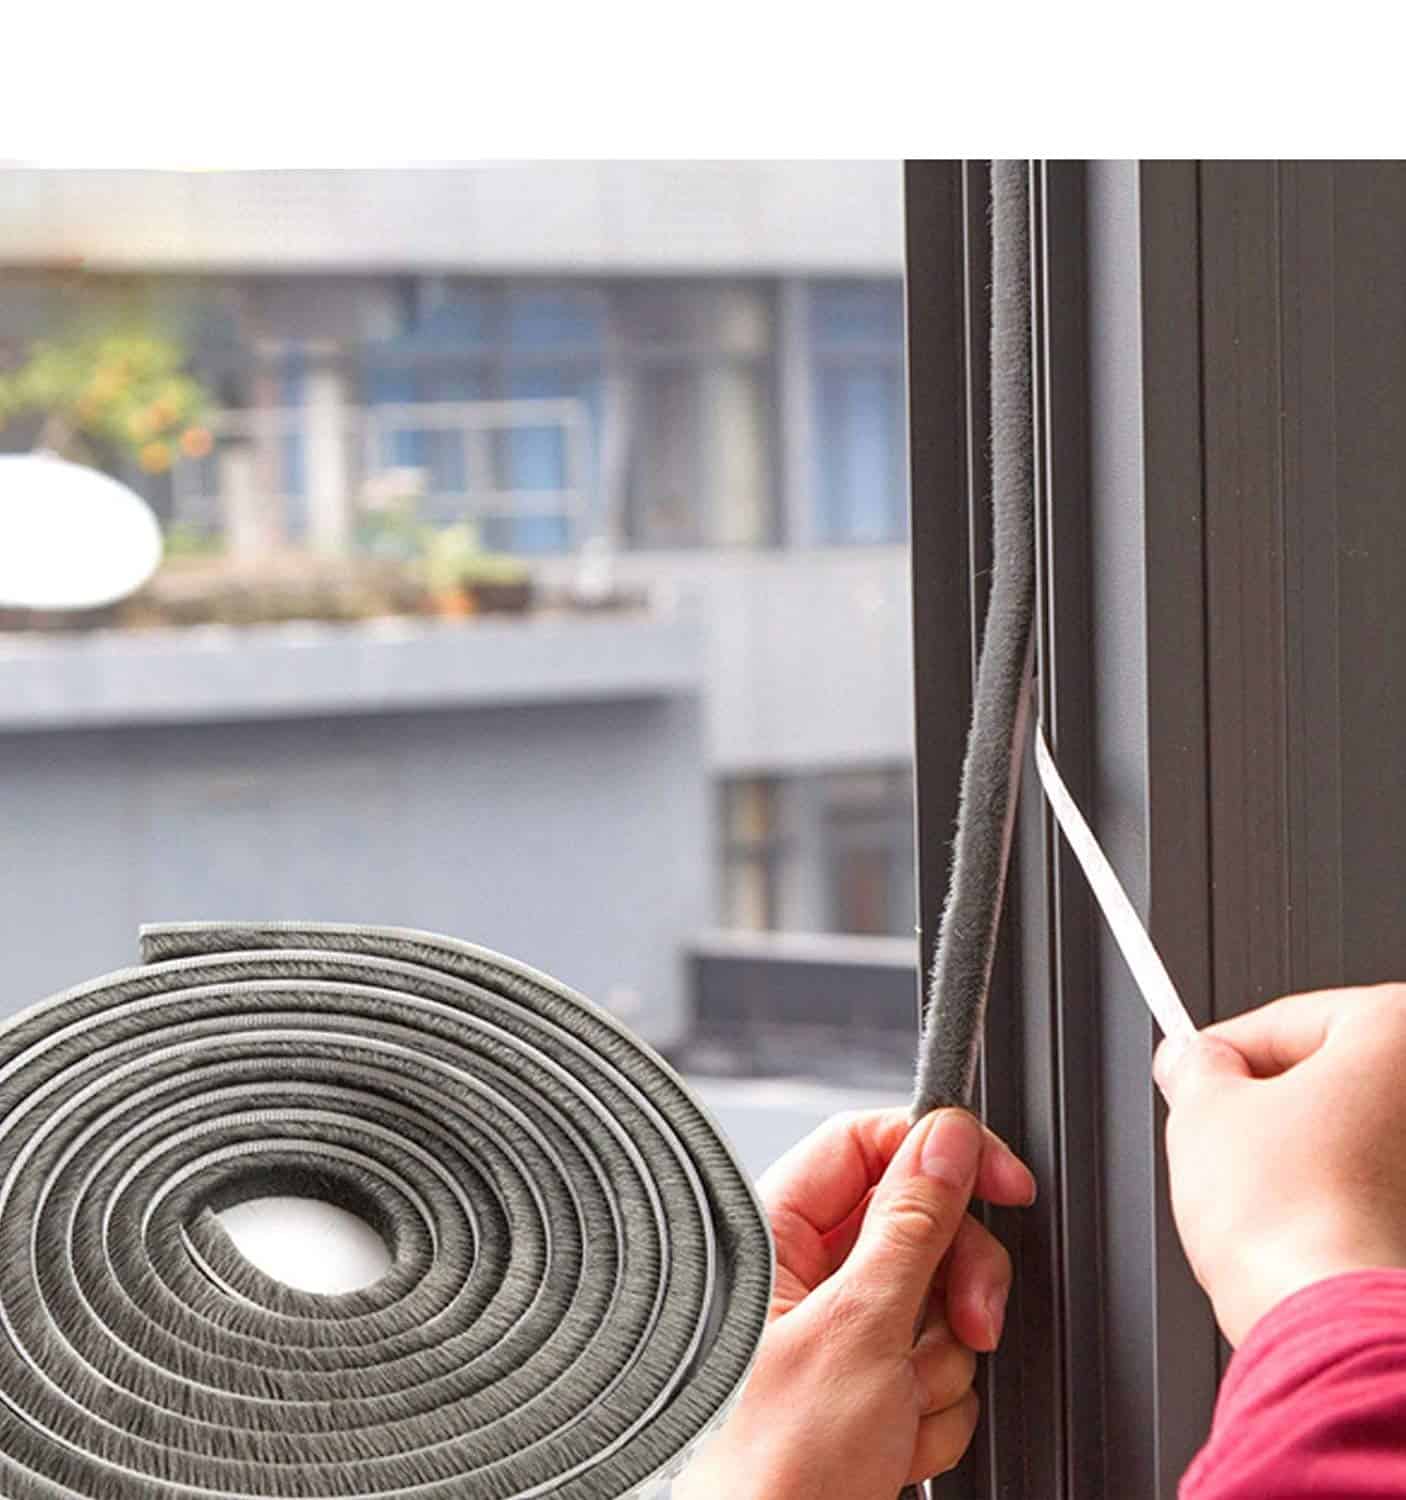 weather stripping on a window reduces noise and saves energy